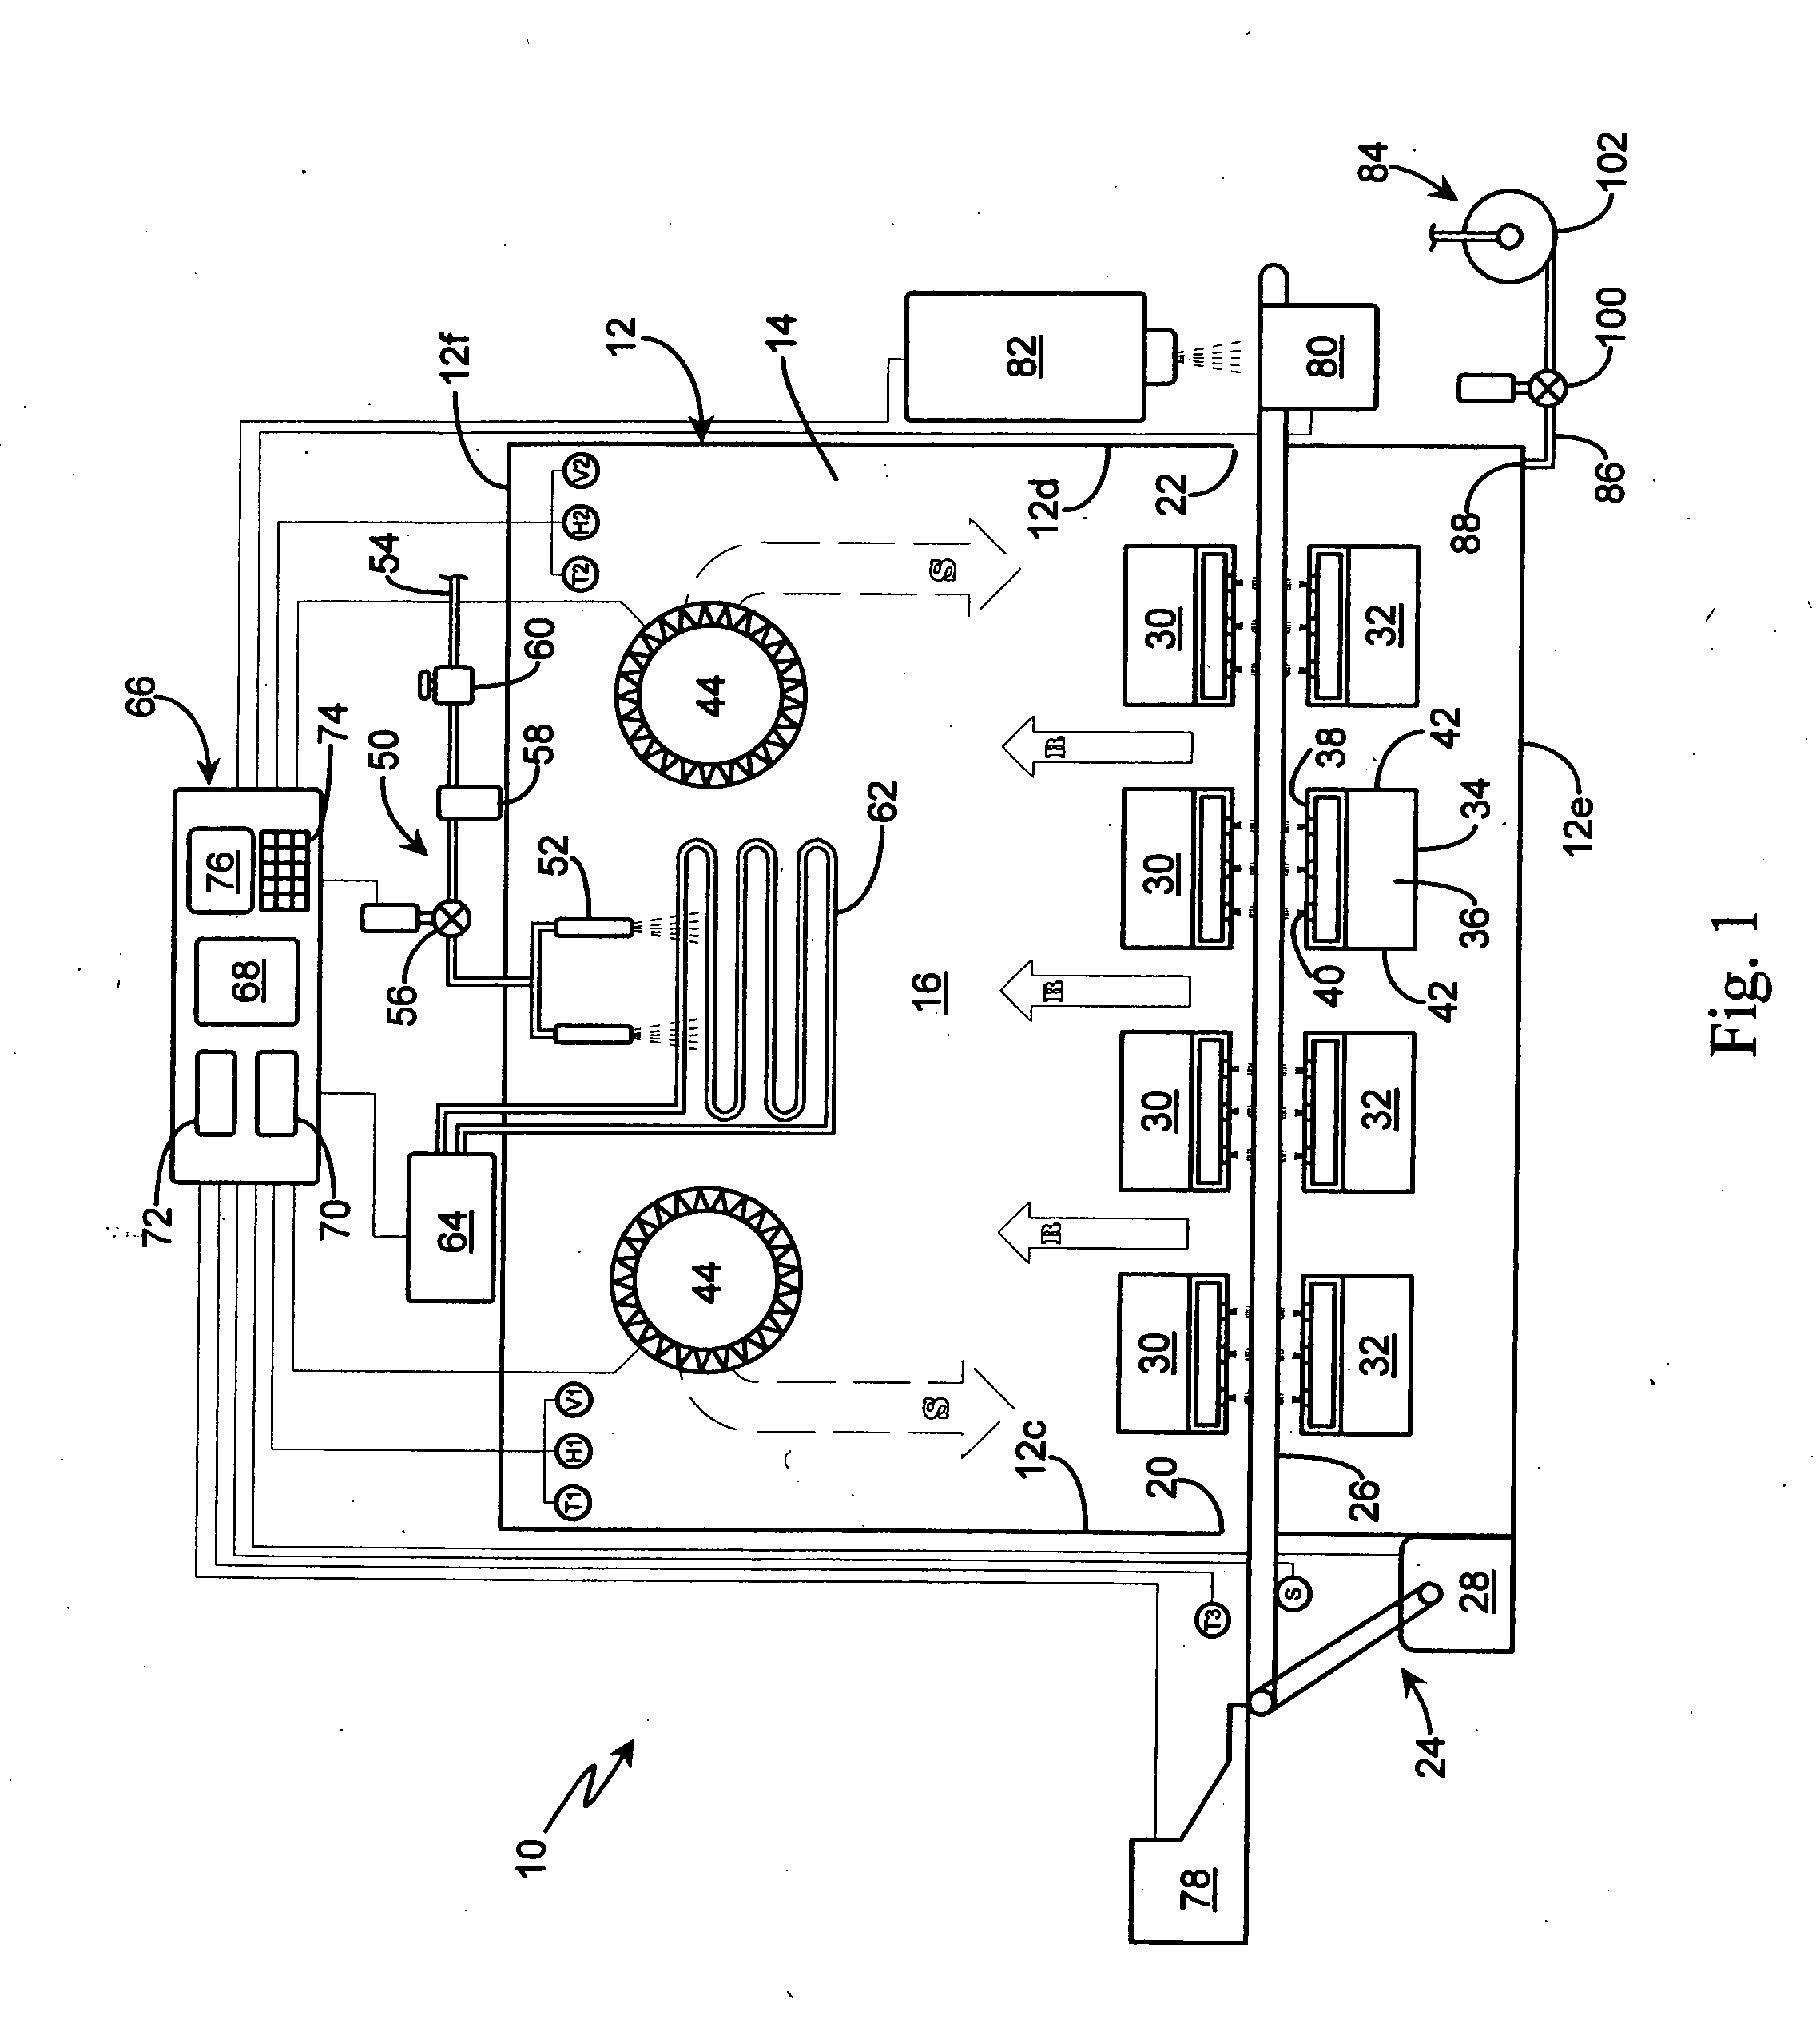 Dry food pasteurization apparatus and method